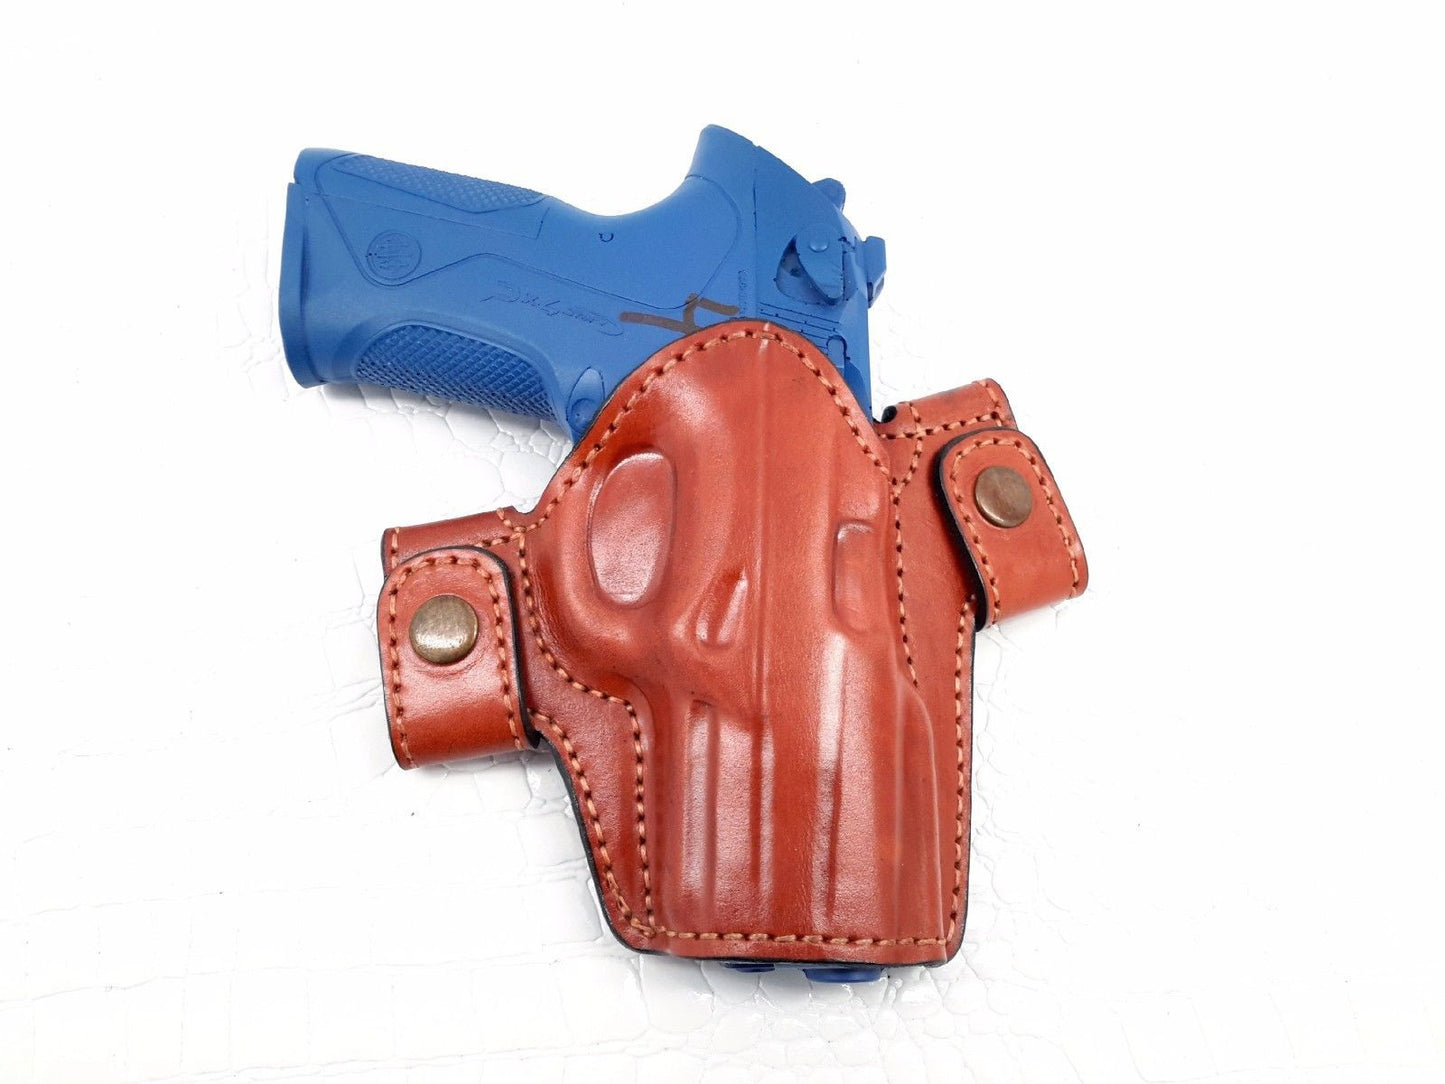 Beretta Px4 Storm Type F Full Size 9 mm OWB Snap-on Leather Holster